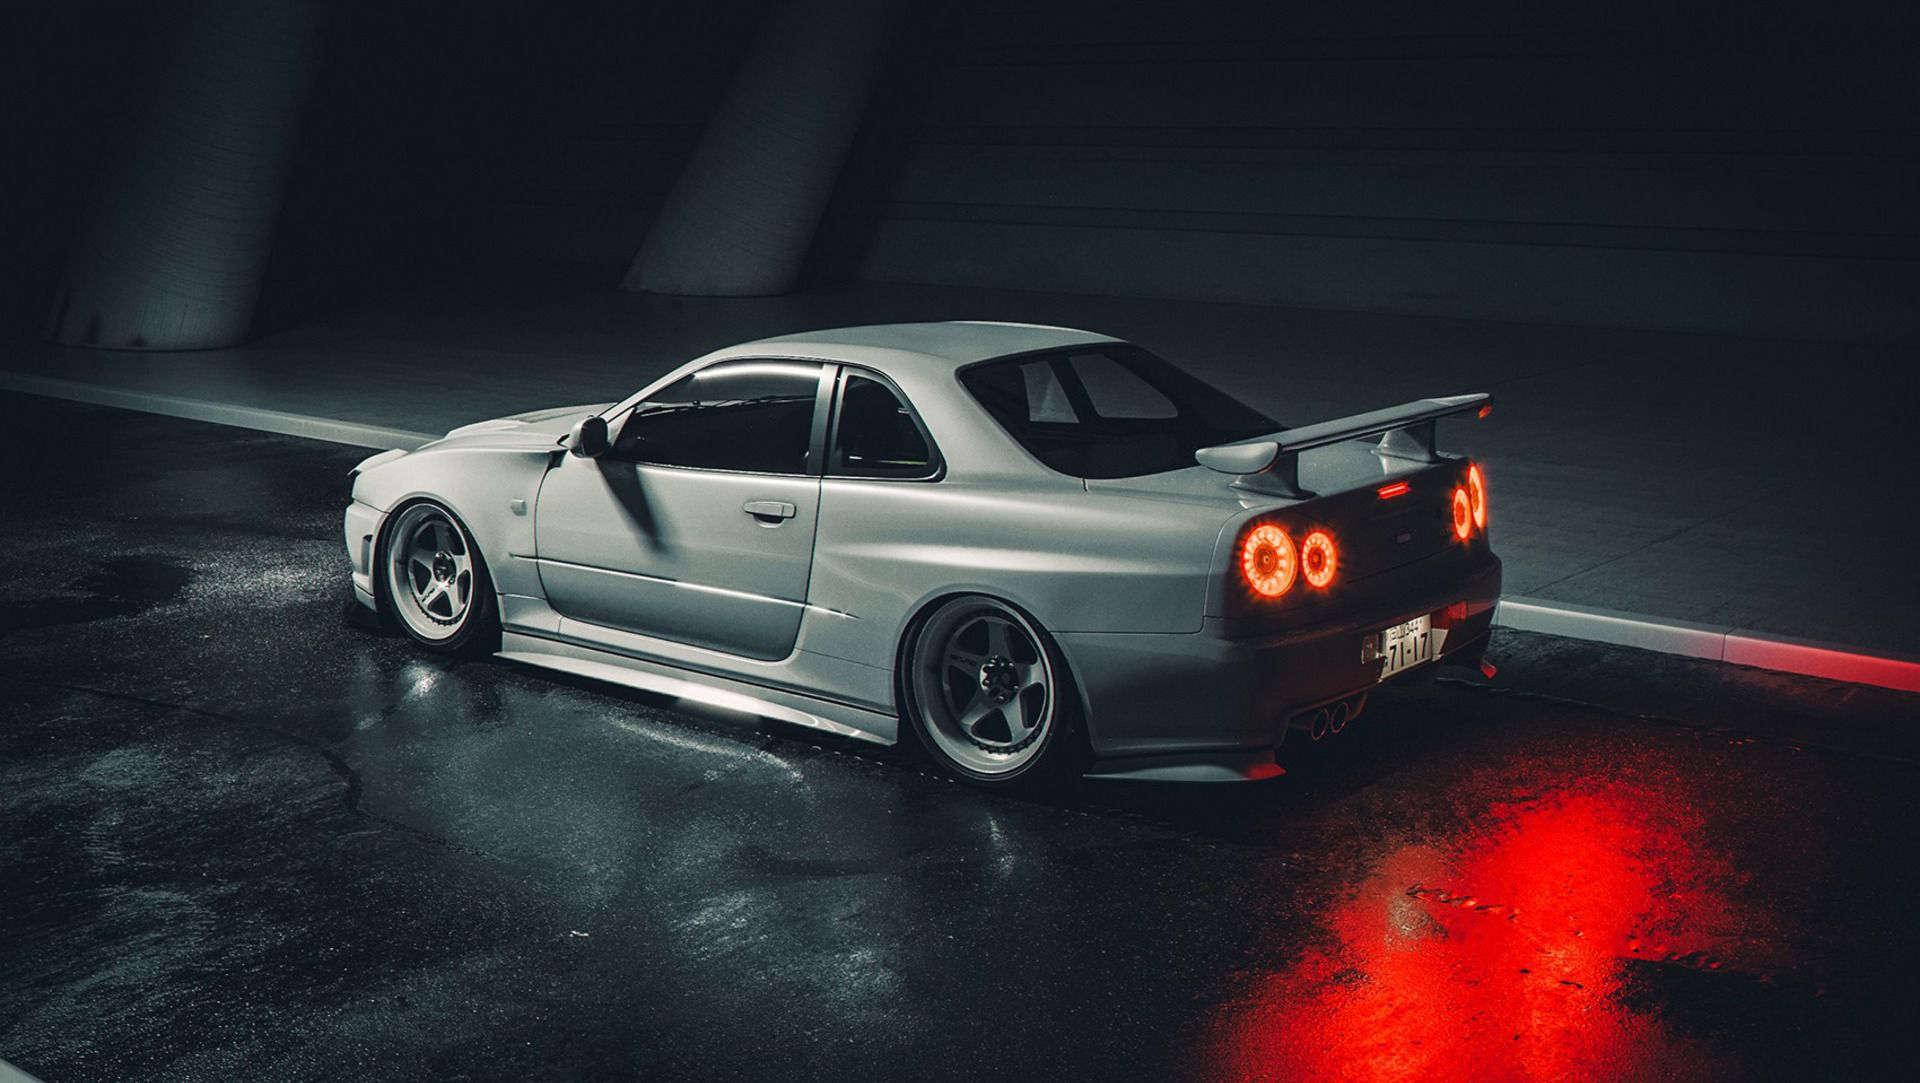 R34 Nissan Skyline GT-R Somehow Exceeds its Astronomical Expectations